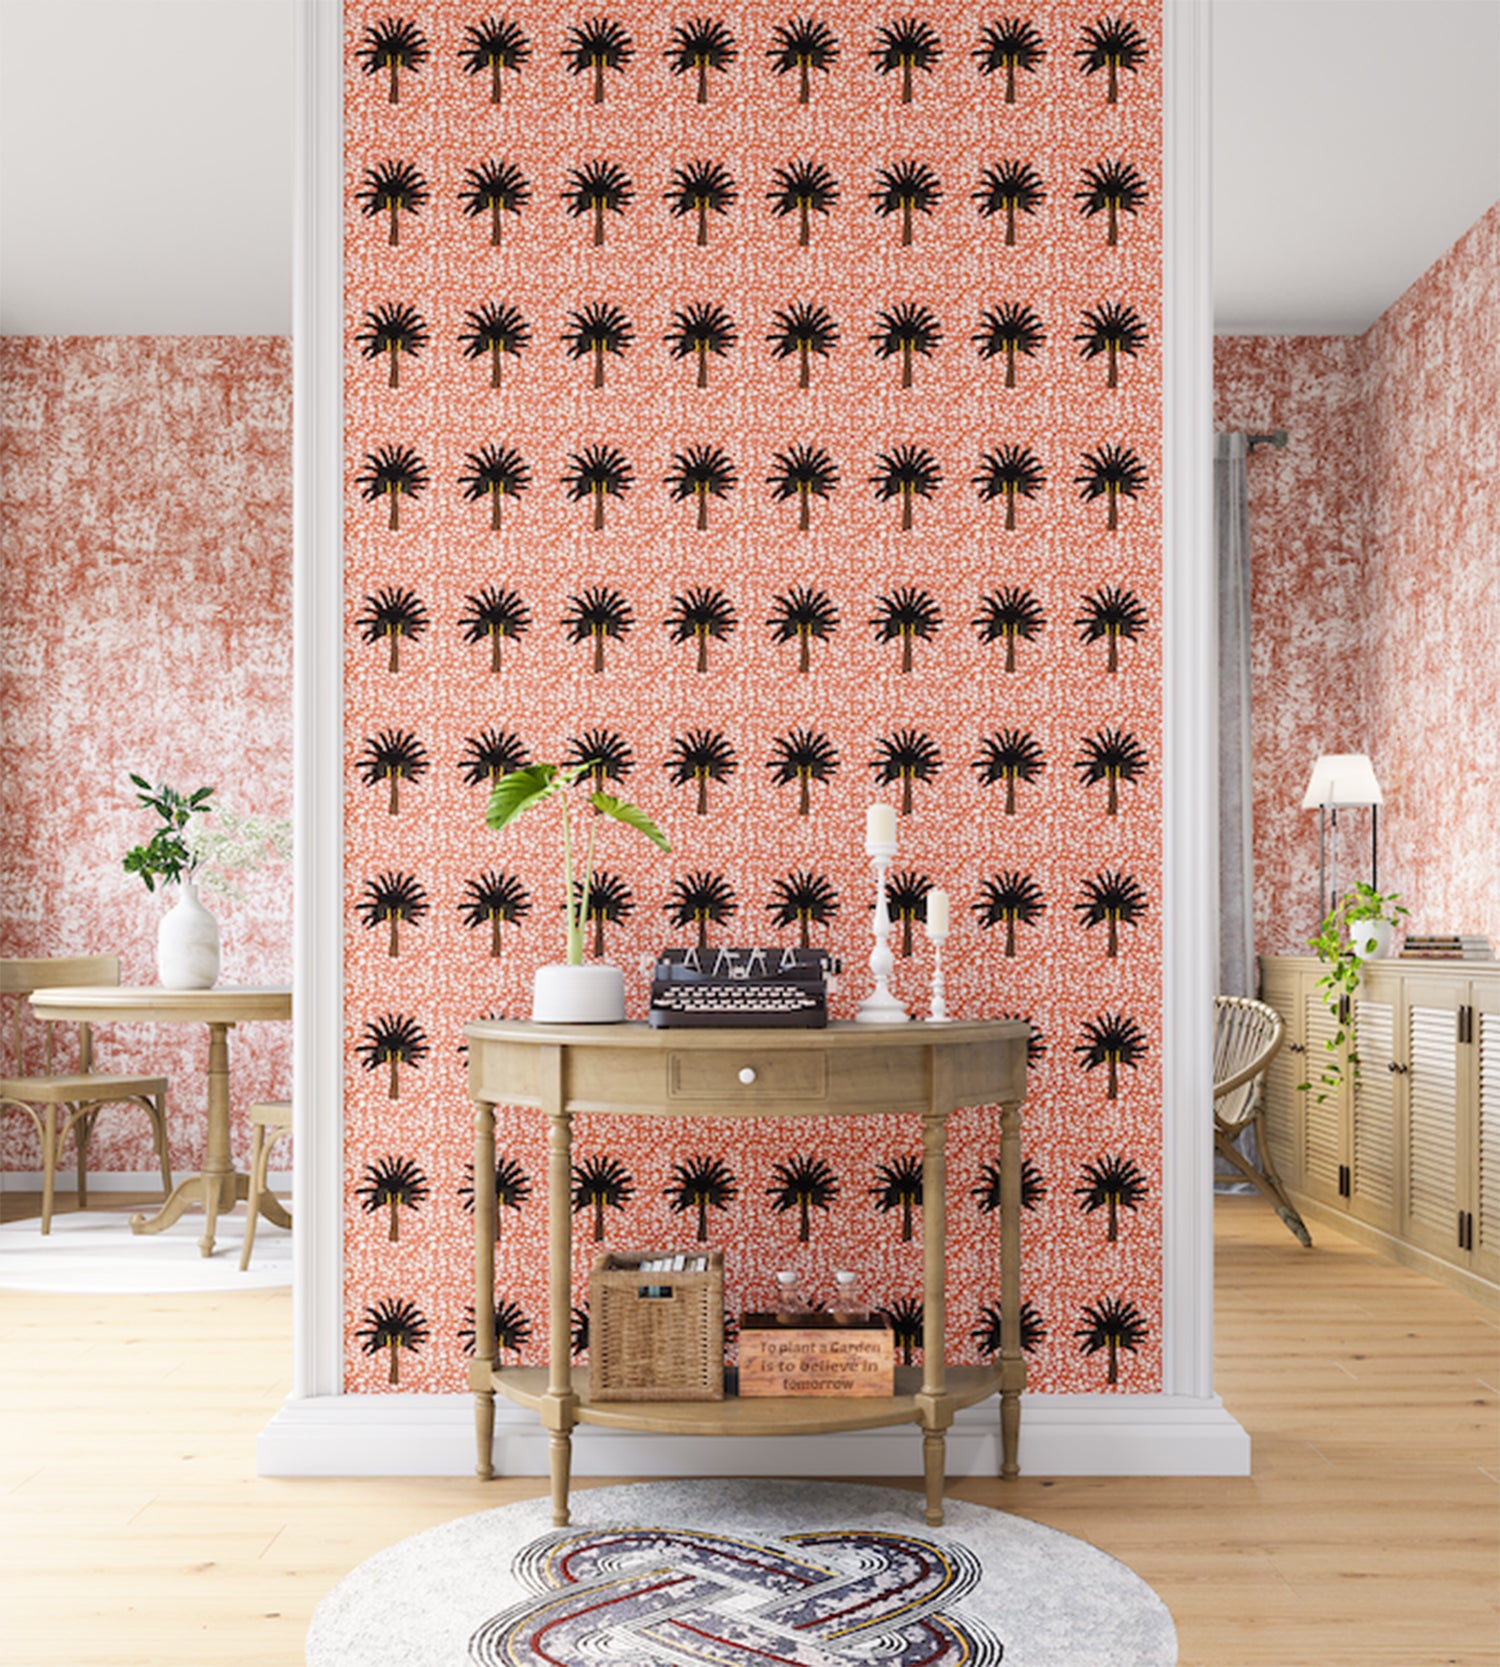 A maximalist living space with an accent wall papered in a repeating palm tree print on a mottled white and coral field.